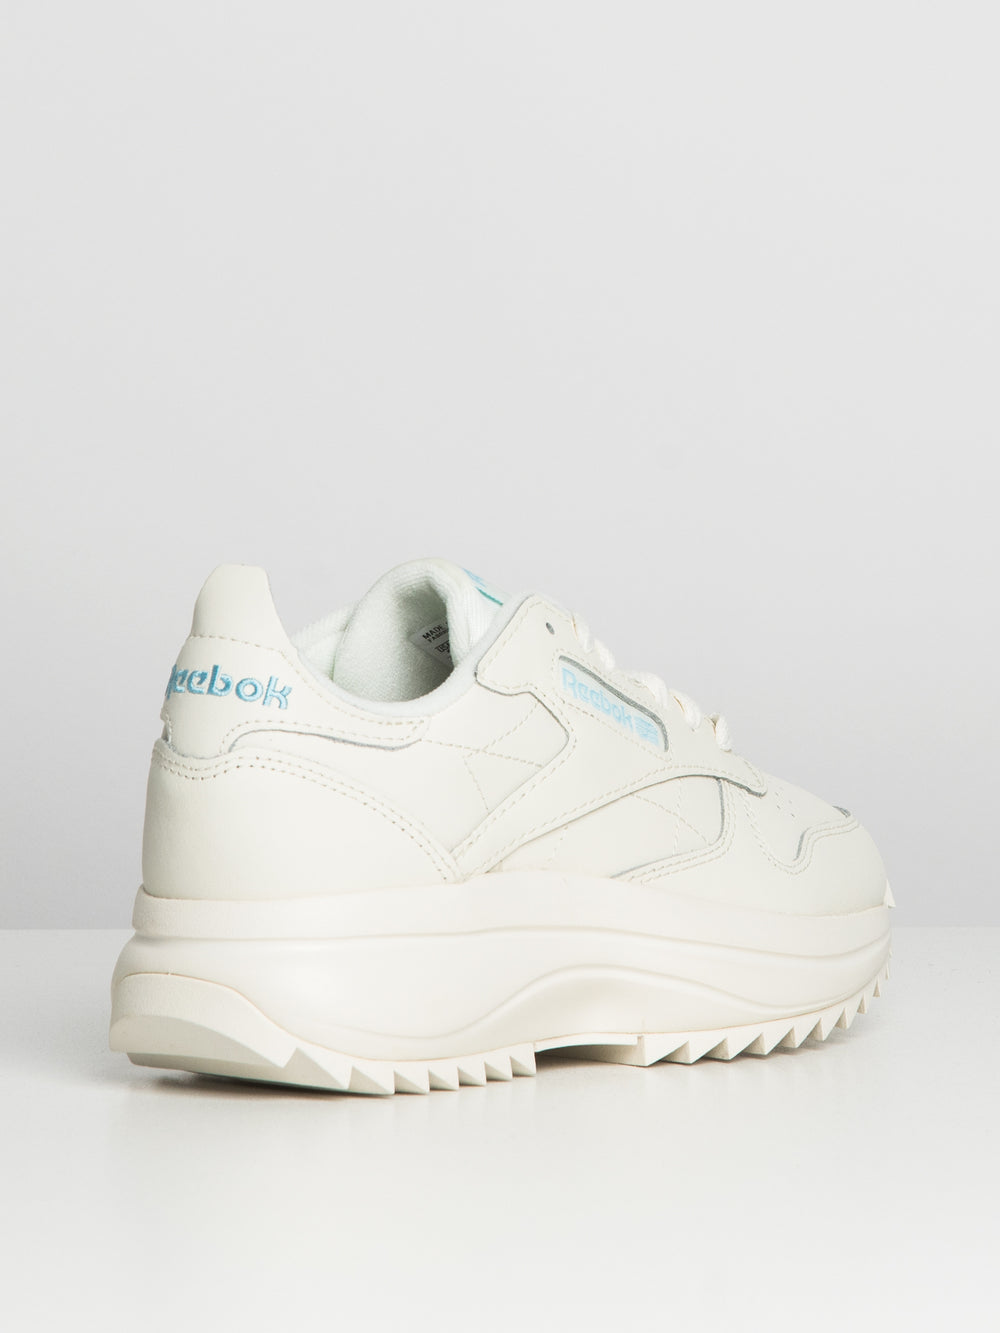 WOMENS REEBOK CLASSIC LEATHER SP EXTRA